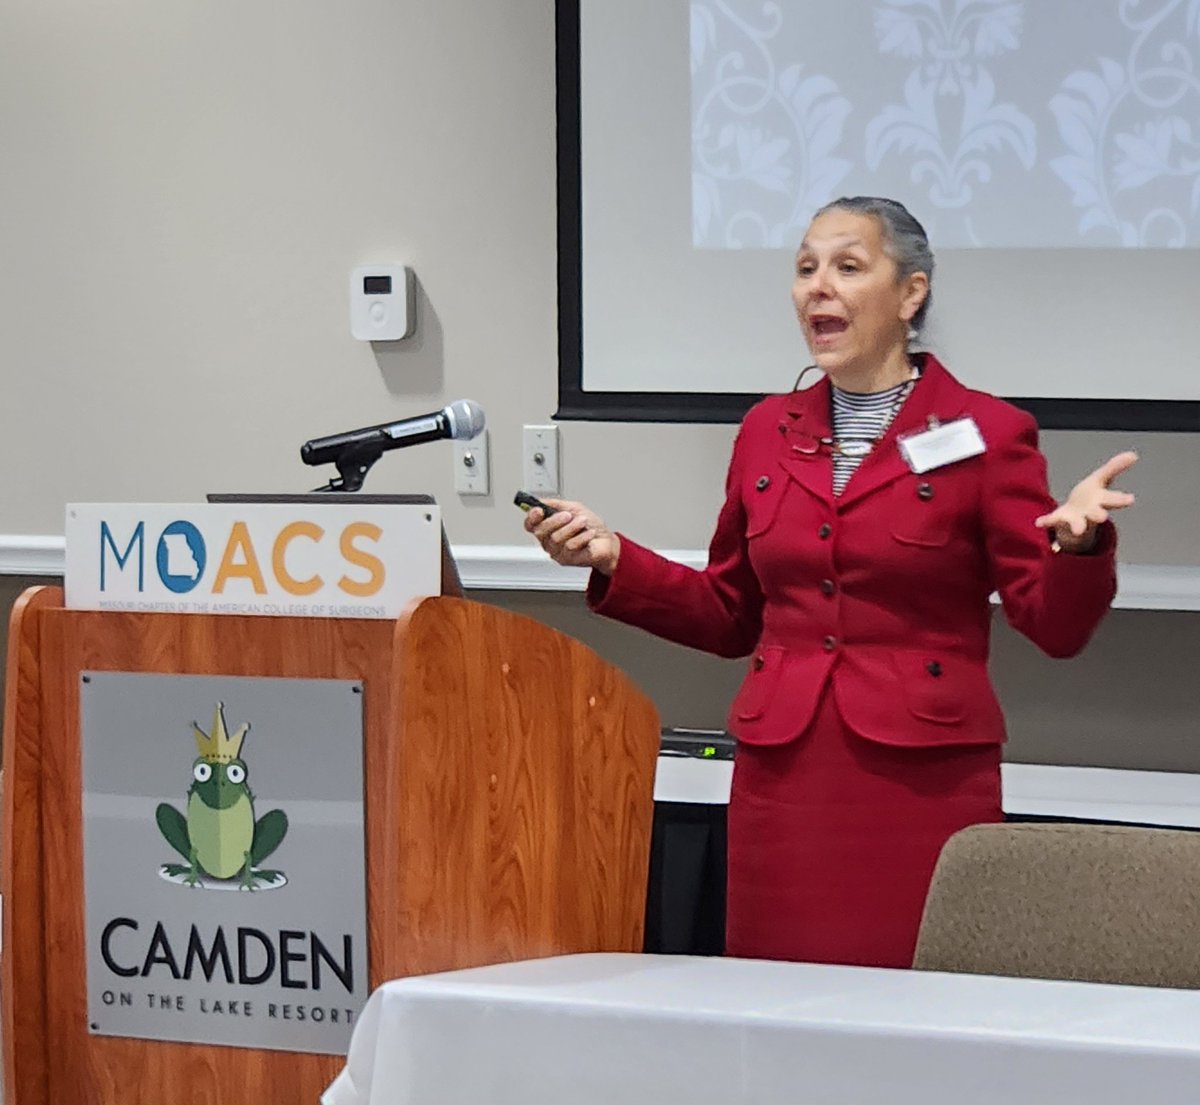 Dr. Anne Rizzo, renowned trauma surgeon and natl leader in surgery - gave an incredible and lively talk this morning on end of life care at MO ACS. Thank you, Dr. Rizzo!